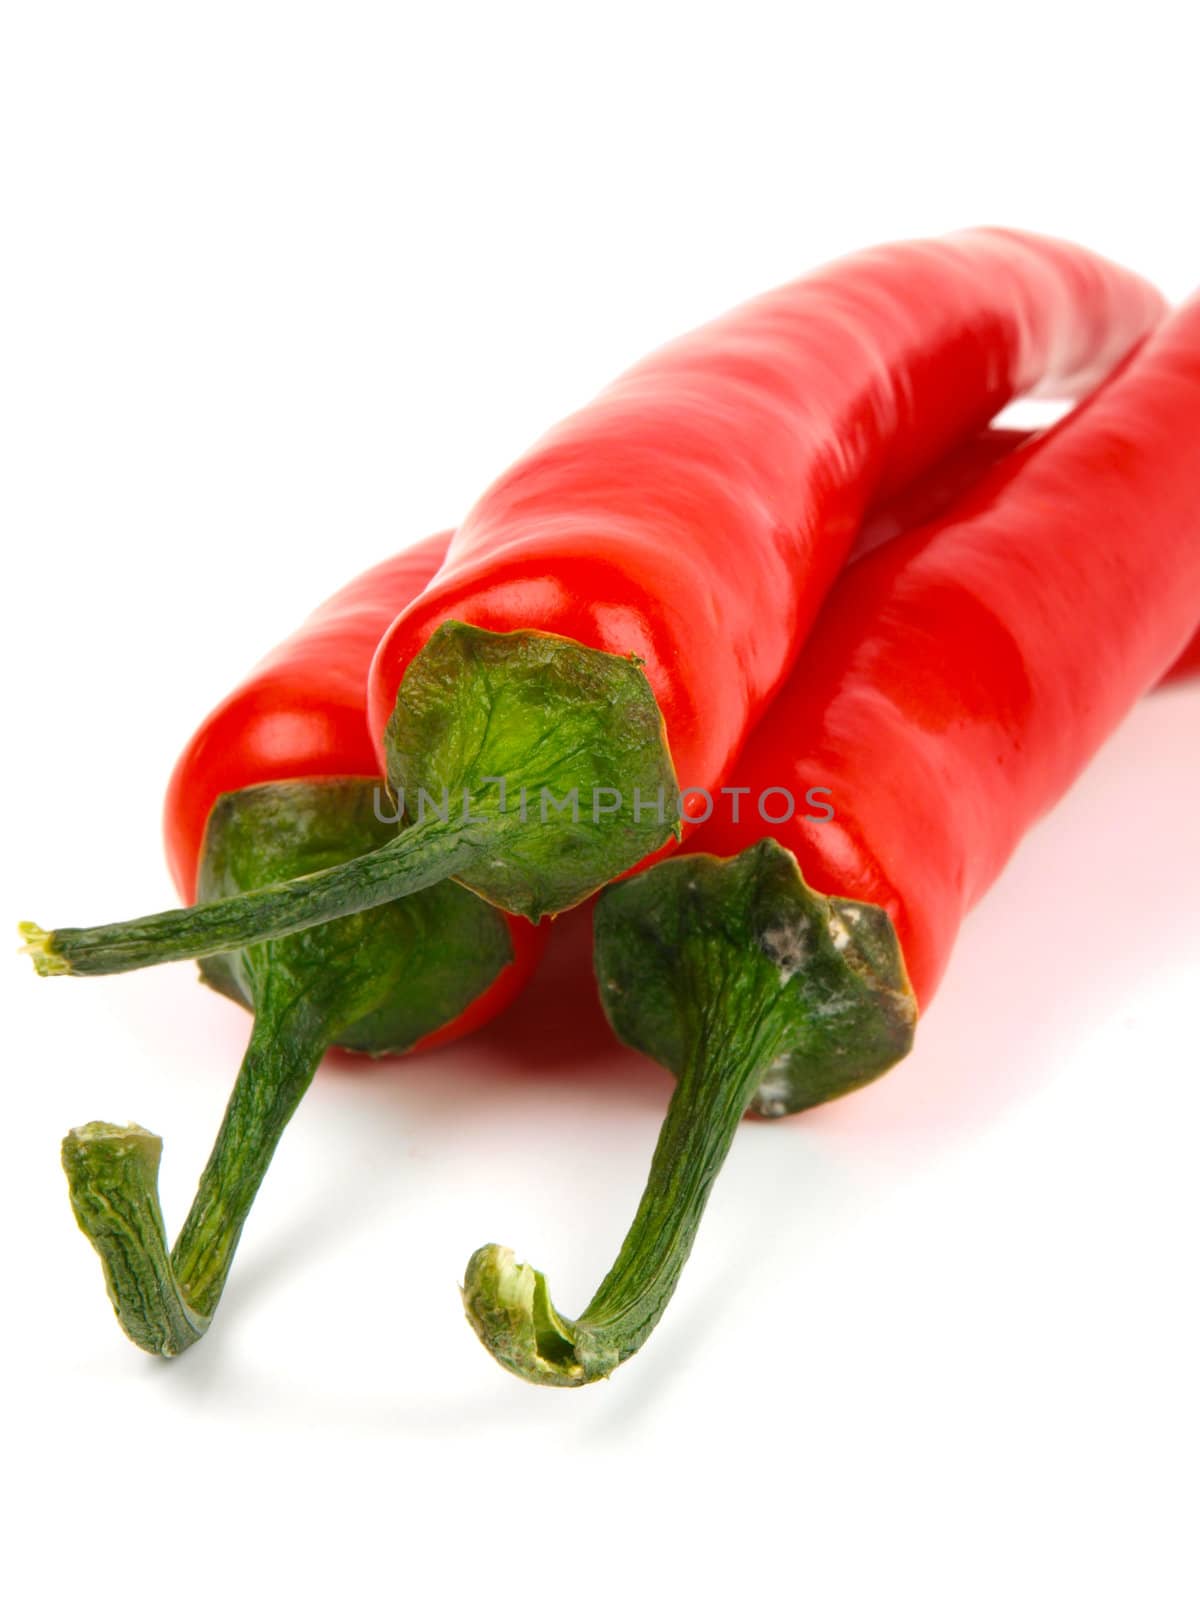 Red chili pepper. Close up. White background